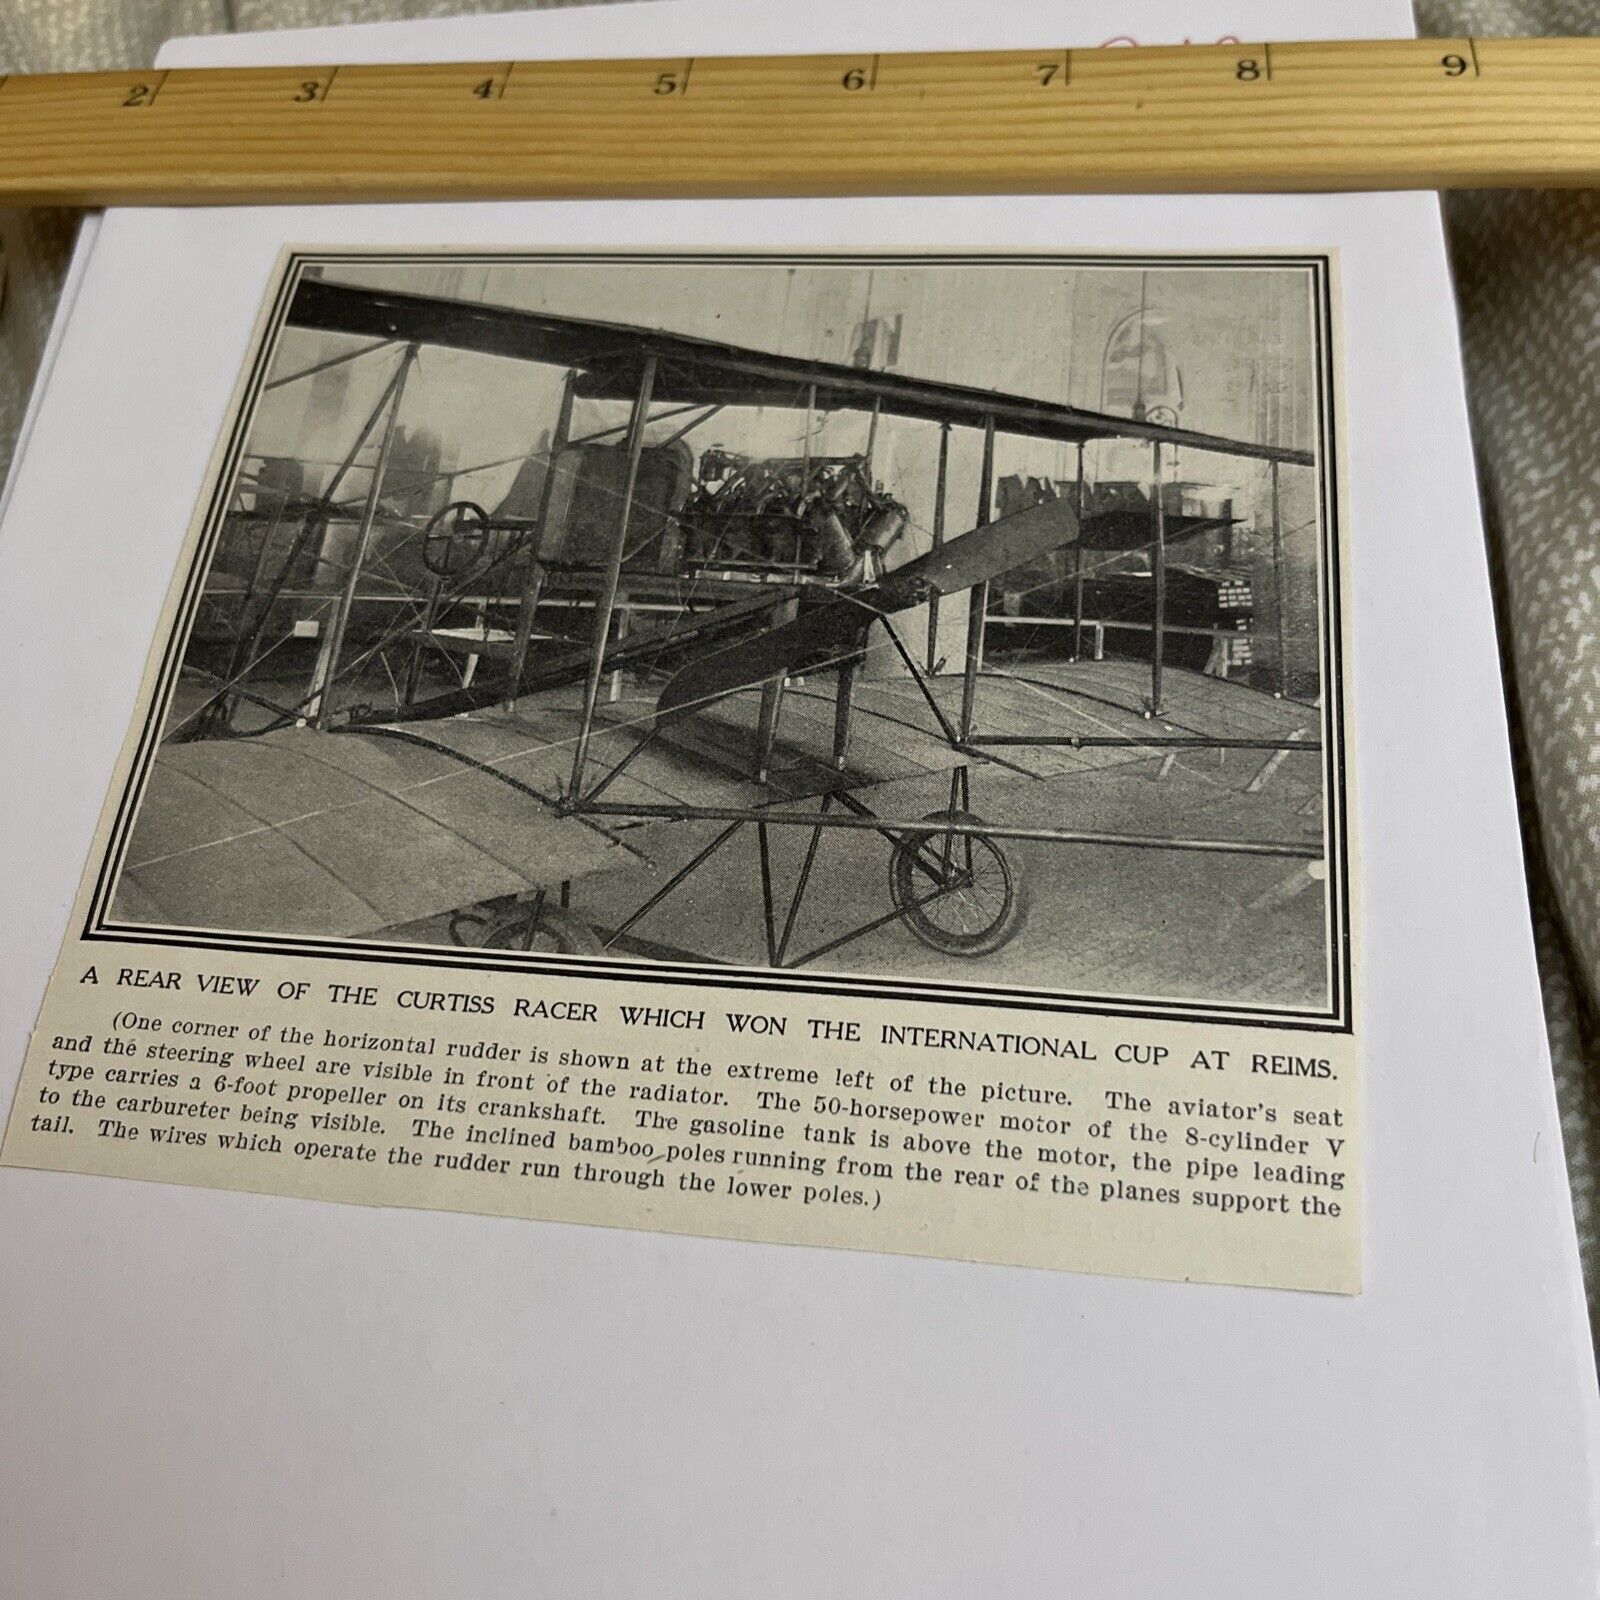 Antique 1909 Image: Rear of Curtiss Racer Airplane Won International Cup Reims